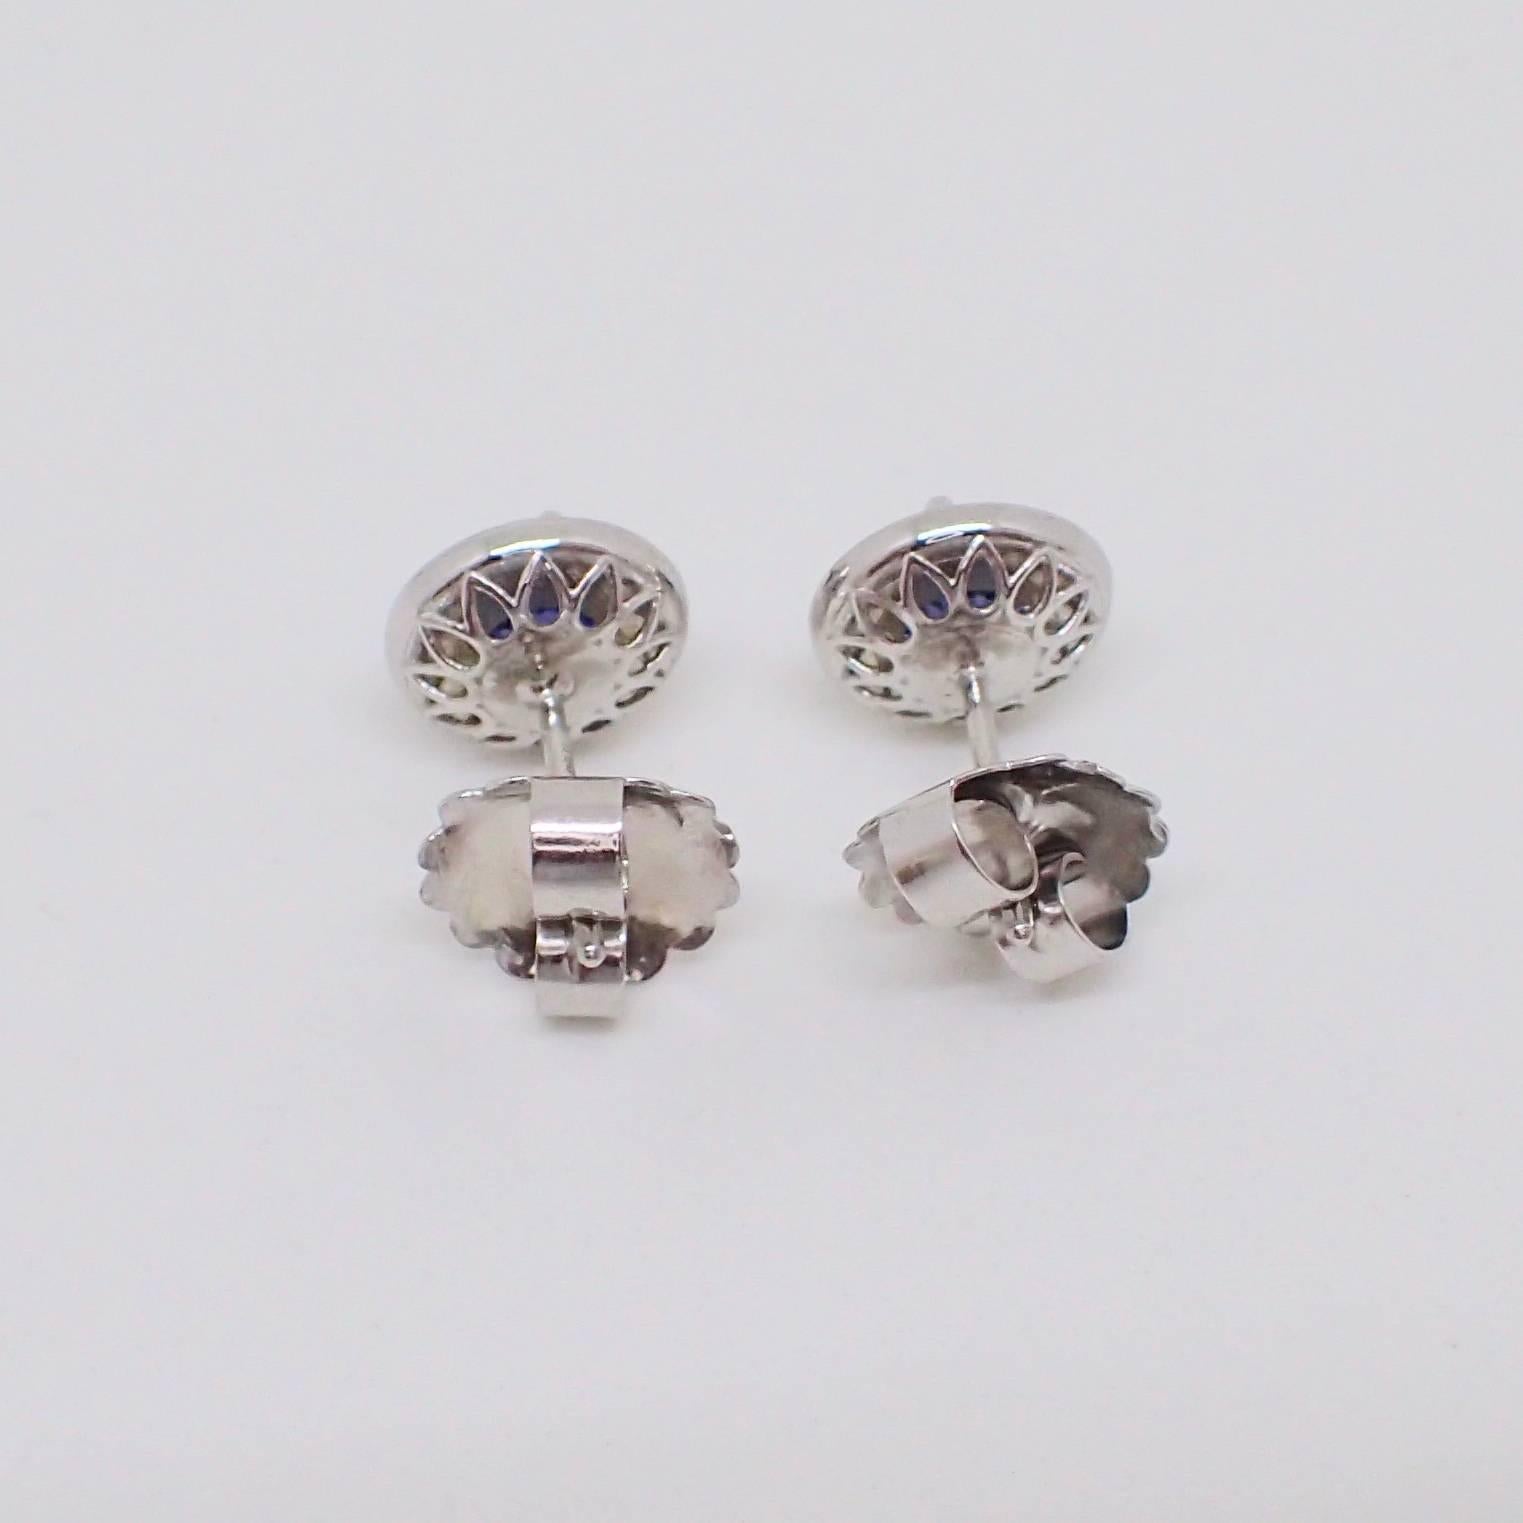 Women's 18k Earrings: 2.21 carats Chatham-Created Blue Sapphire & 0.39 carats of Diamond